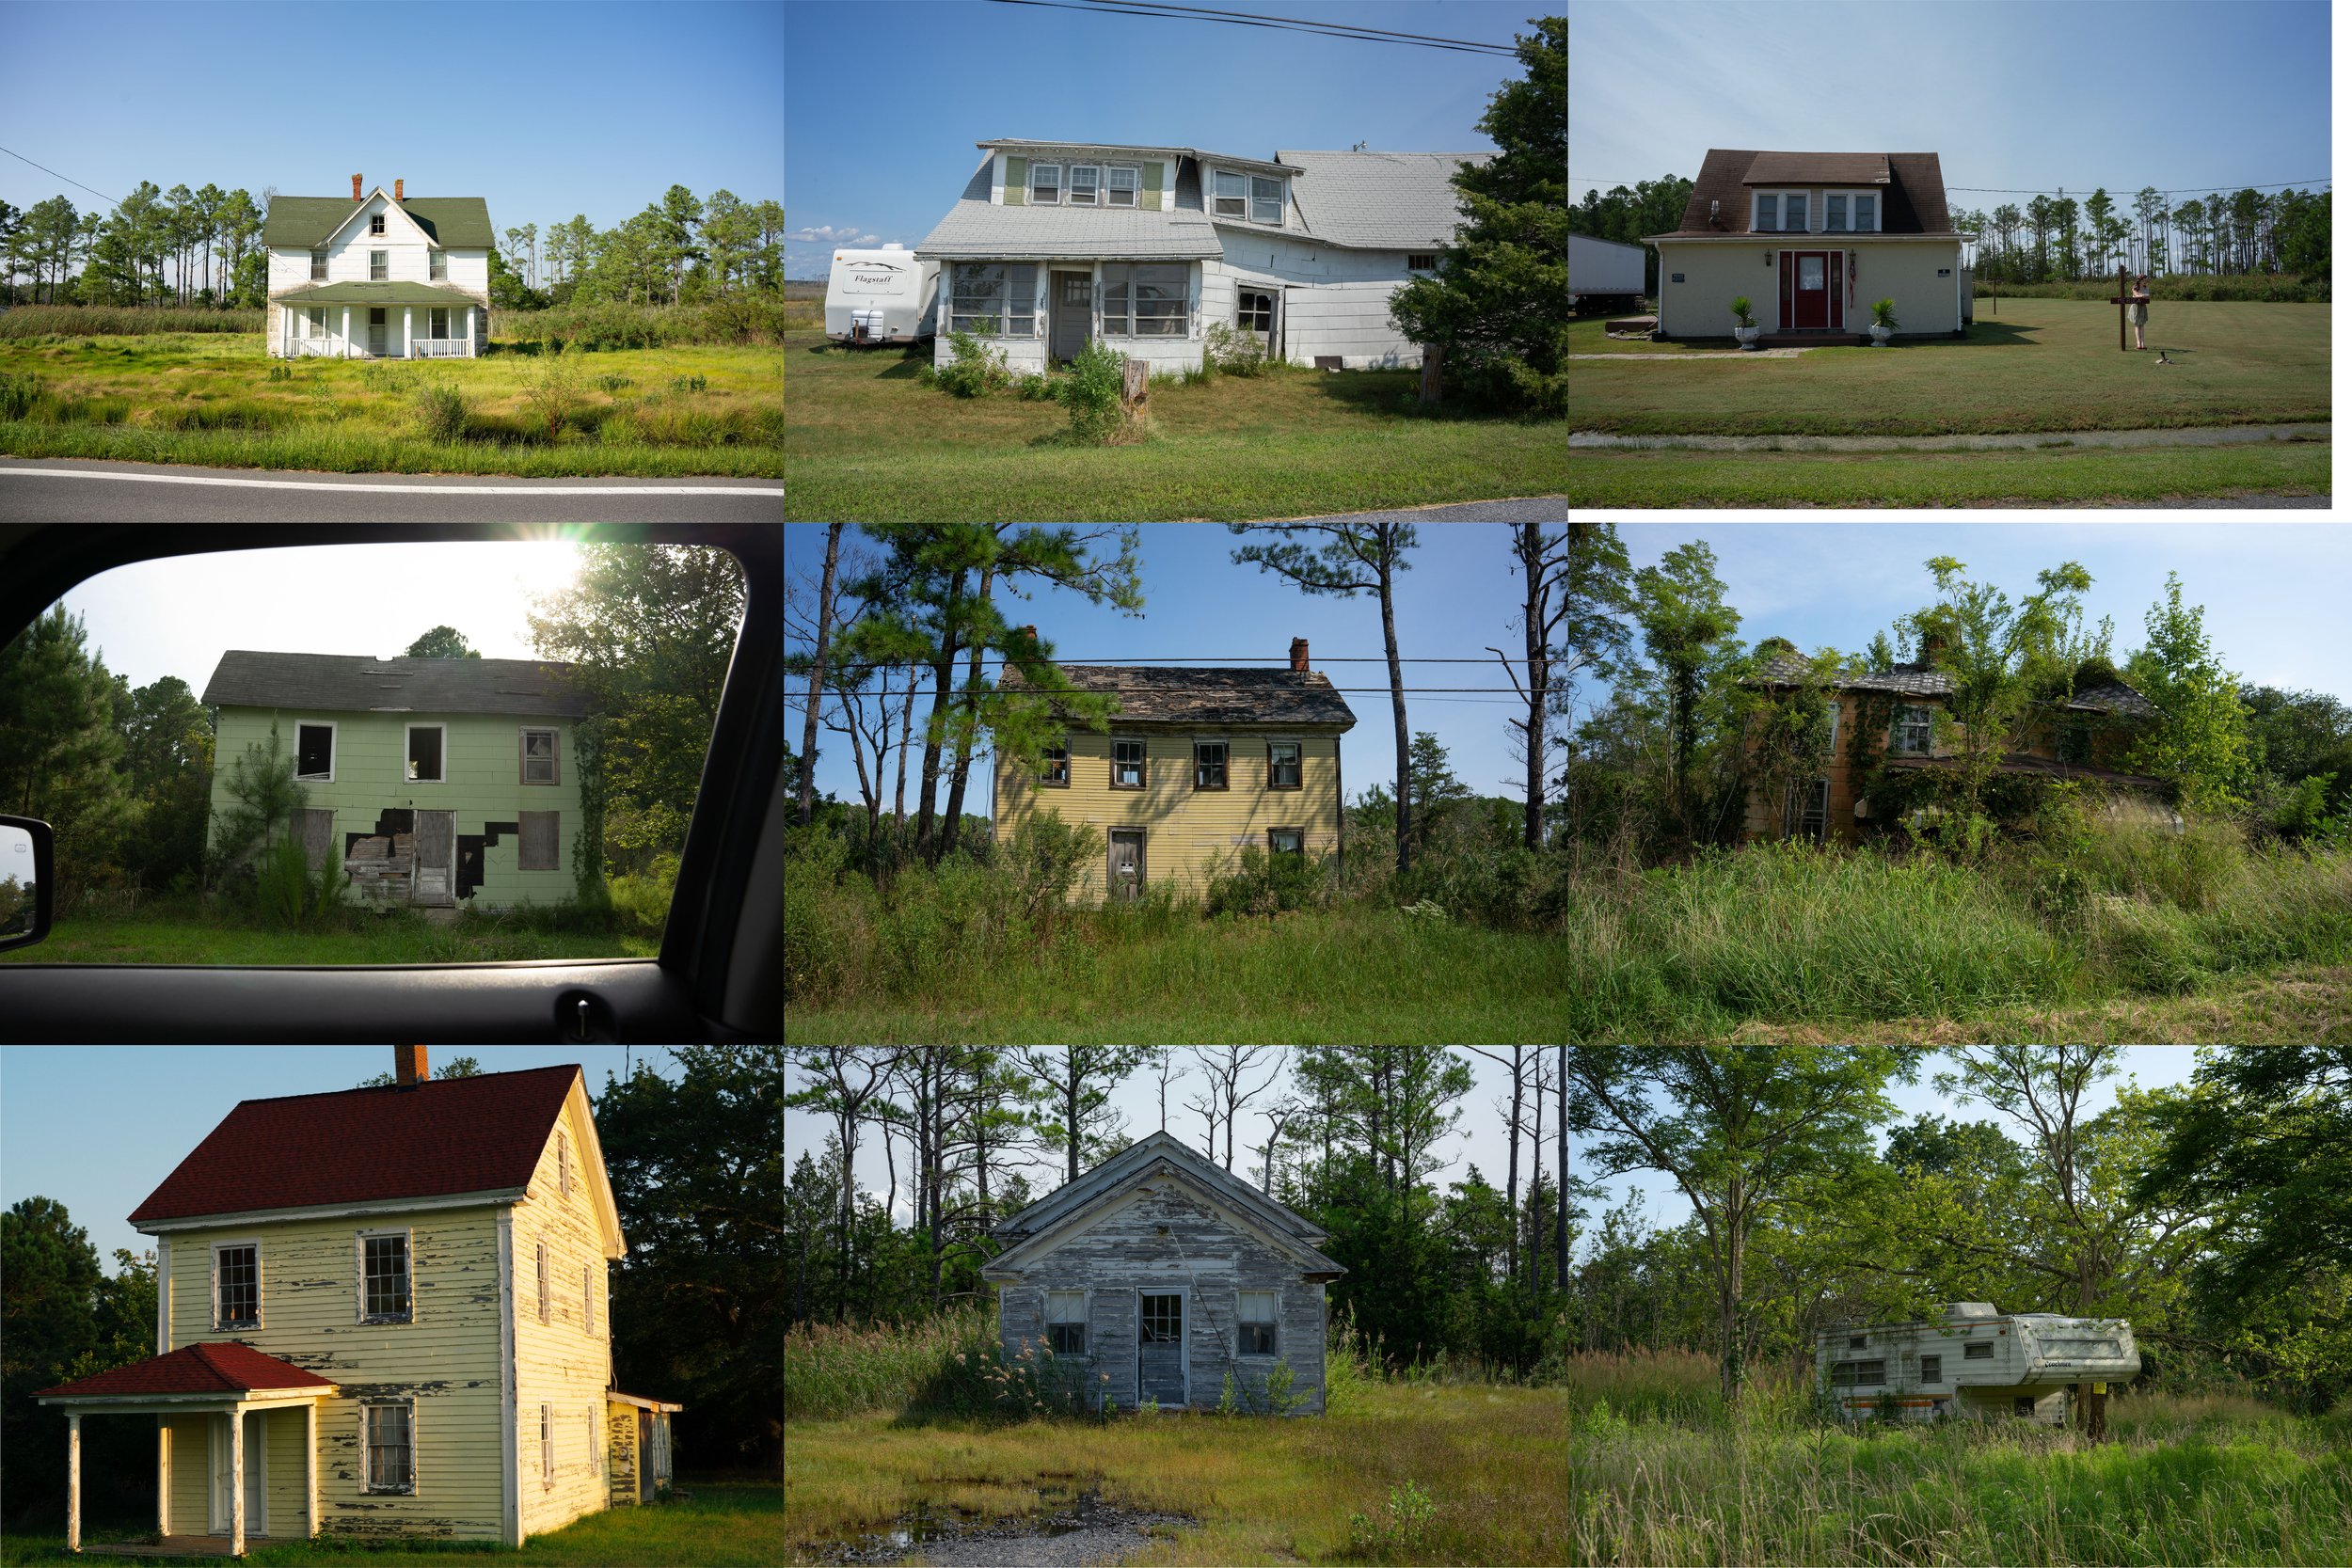 Empty Homes across Dorchester County